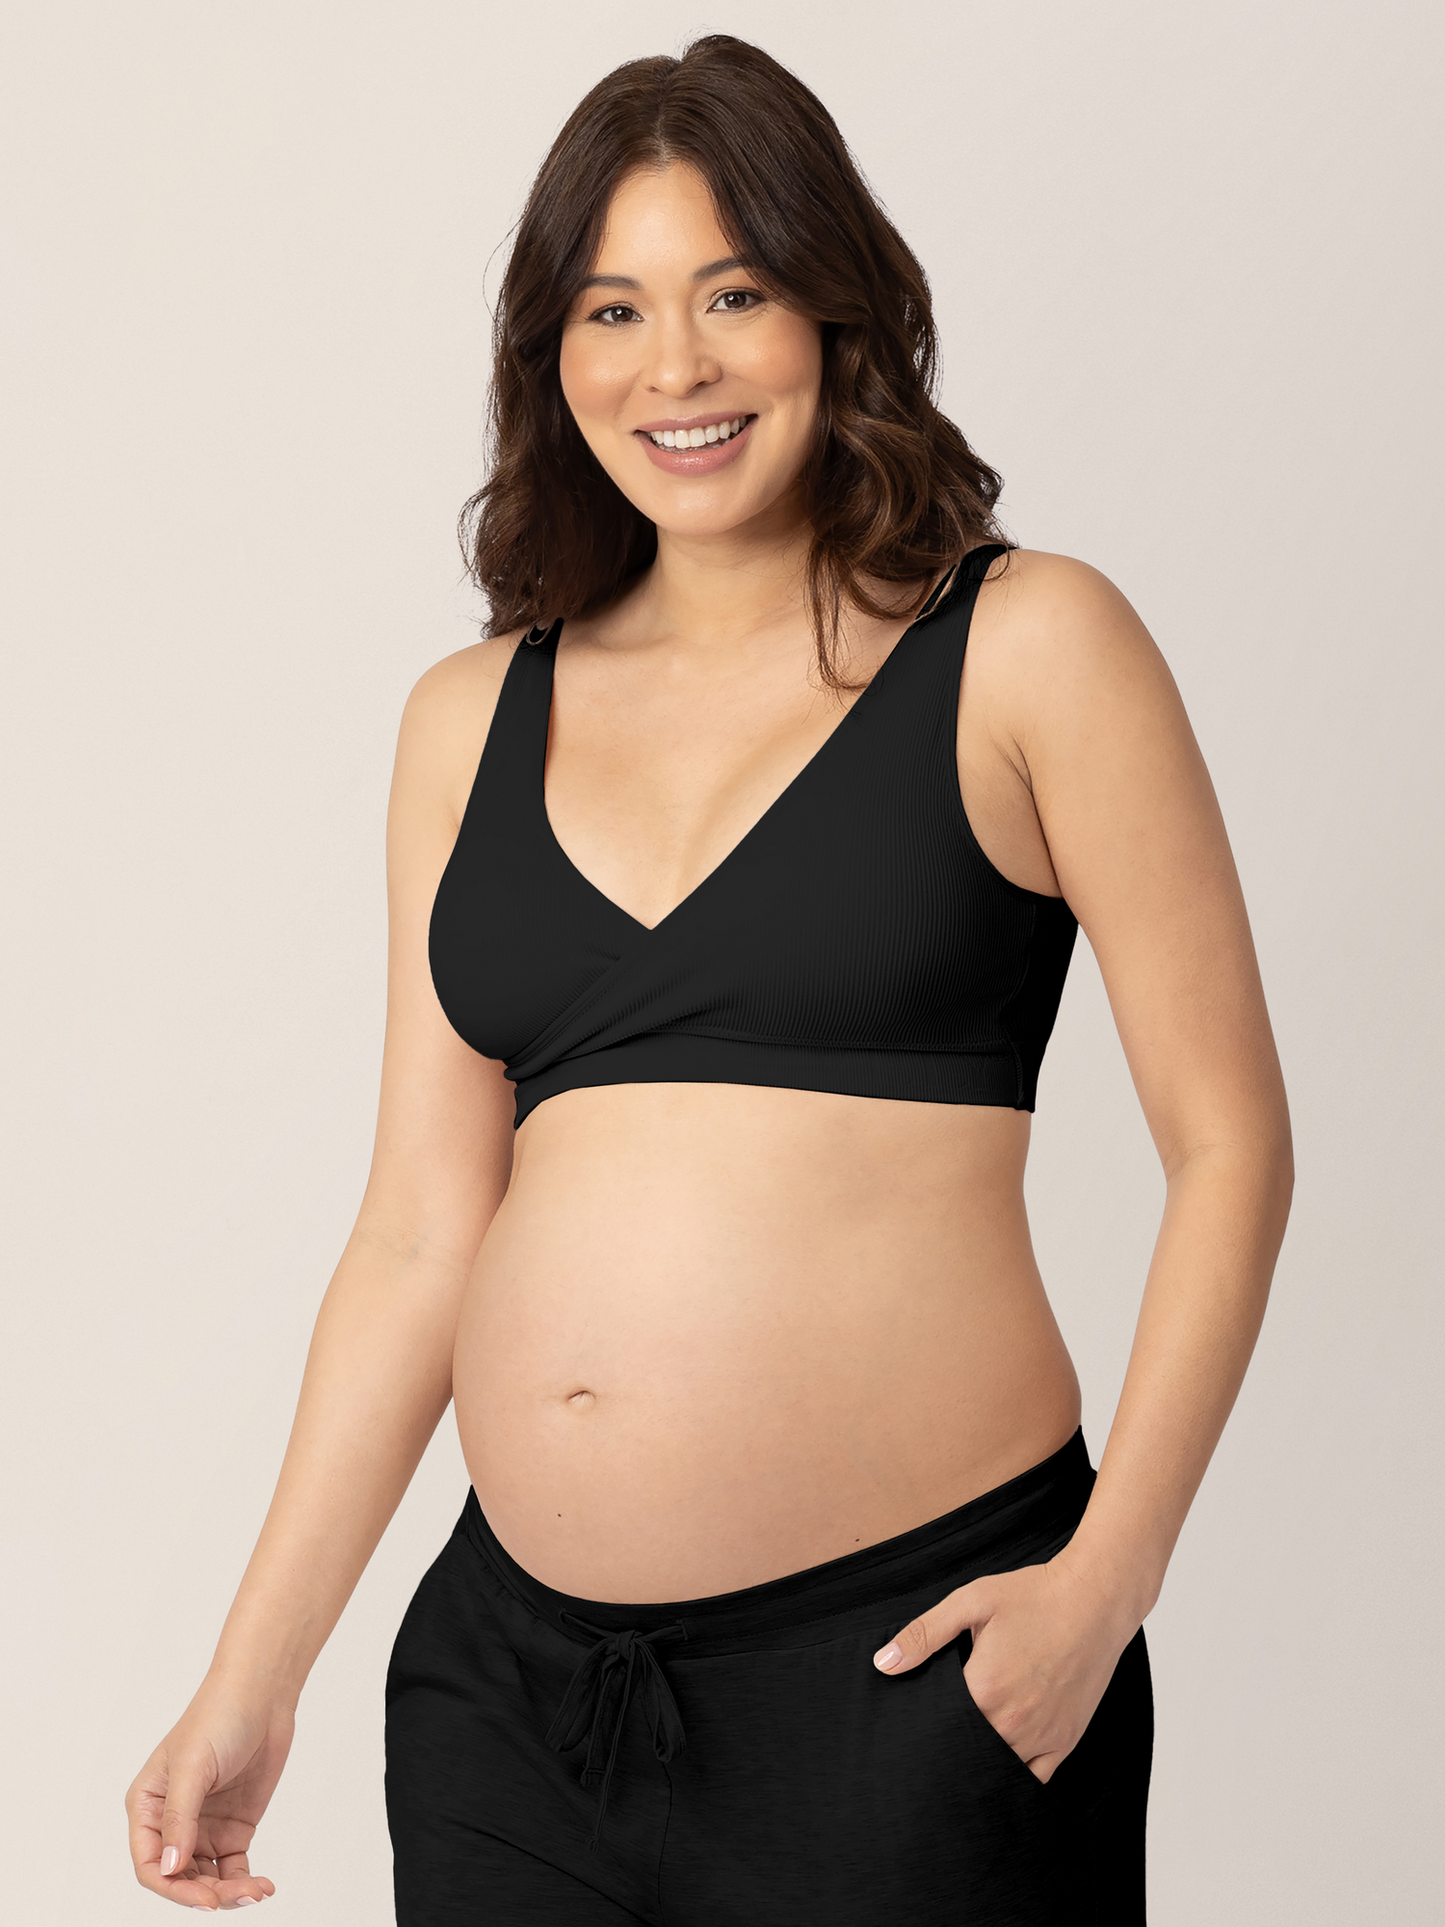 Pregnant Model wearing the Sublime® Adjustable Crossover Nursing & Lounge Bra in Black with her hand in her pocket. 